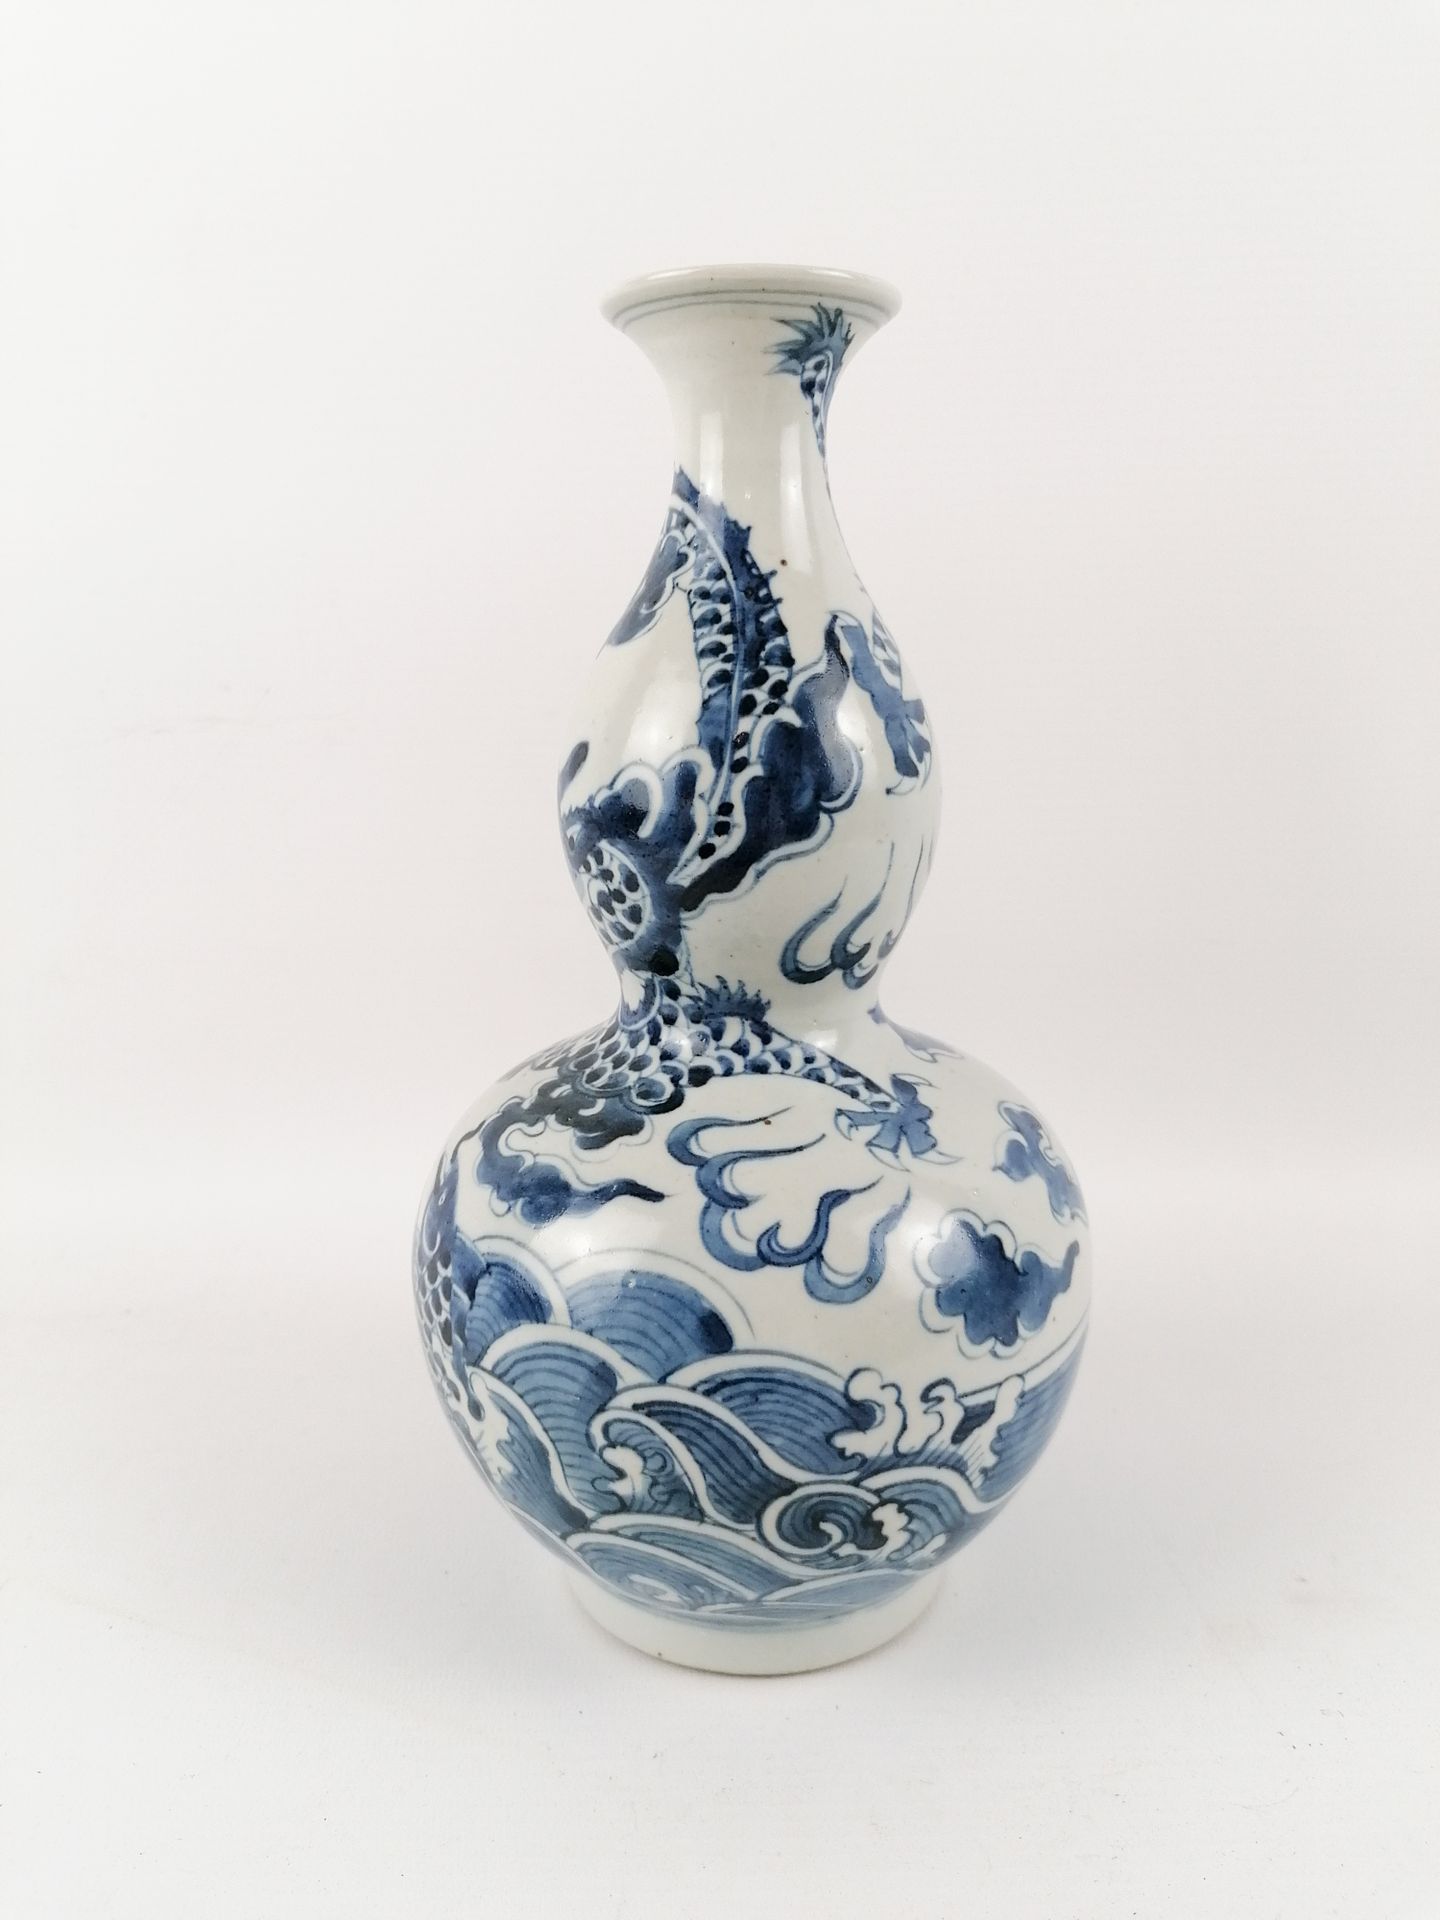 Null CHINA, 19th century
Enameled porcelain double gourd vase, with blue and whi&hellip;